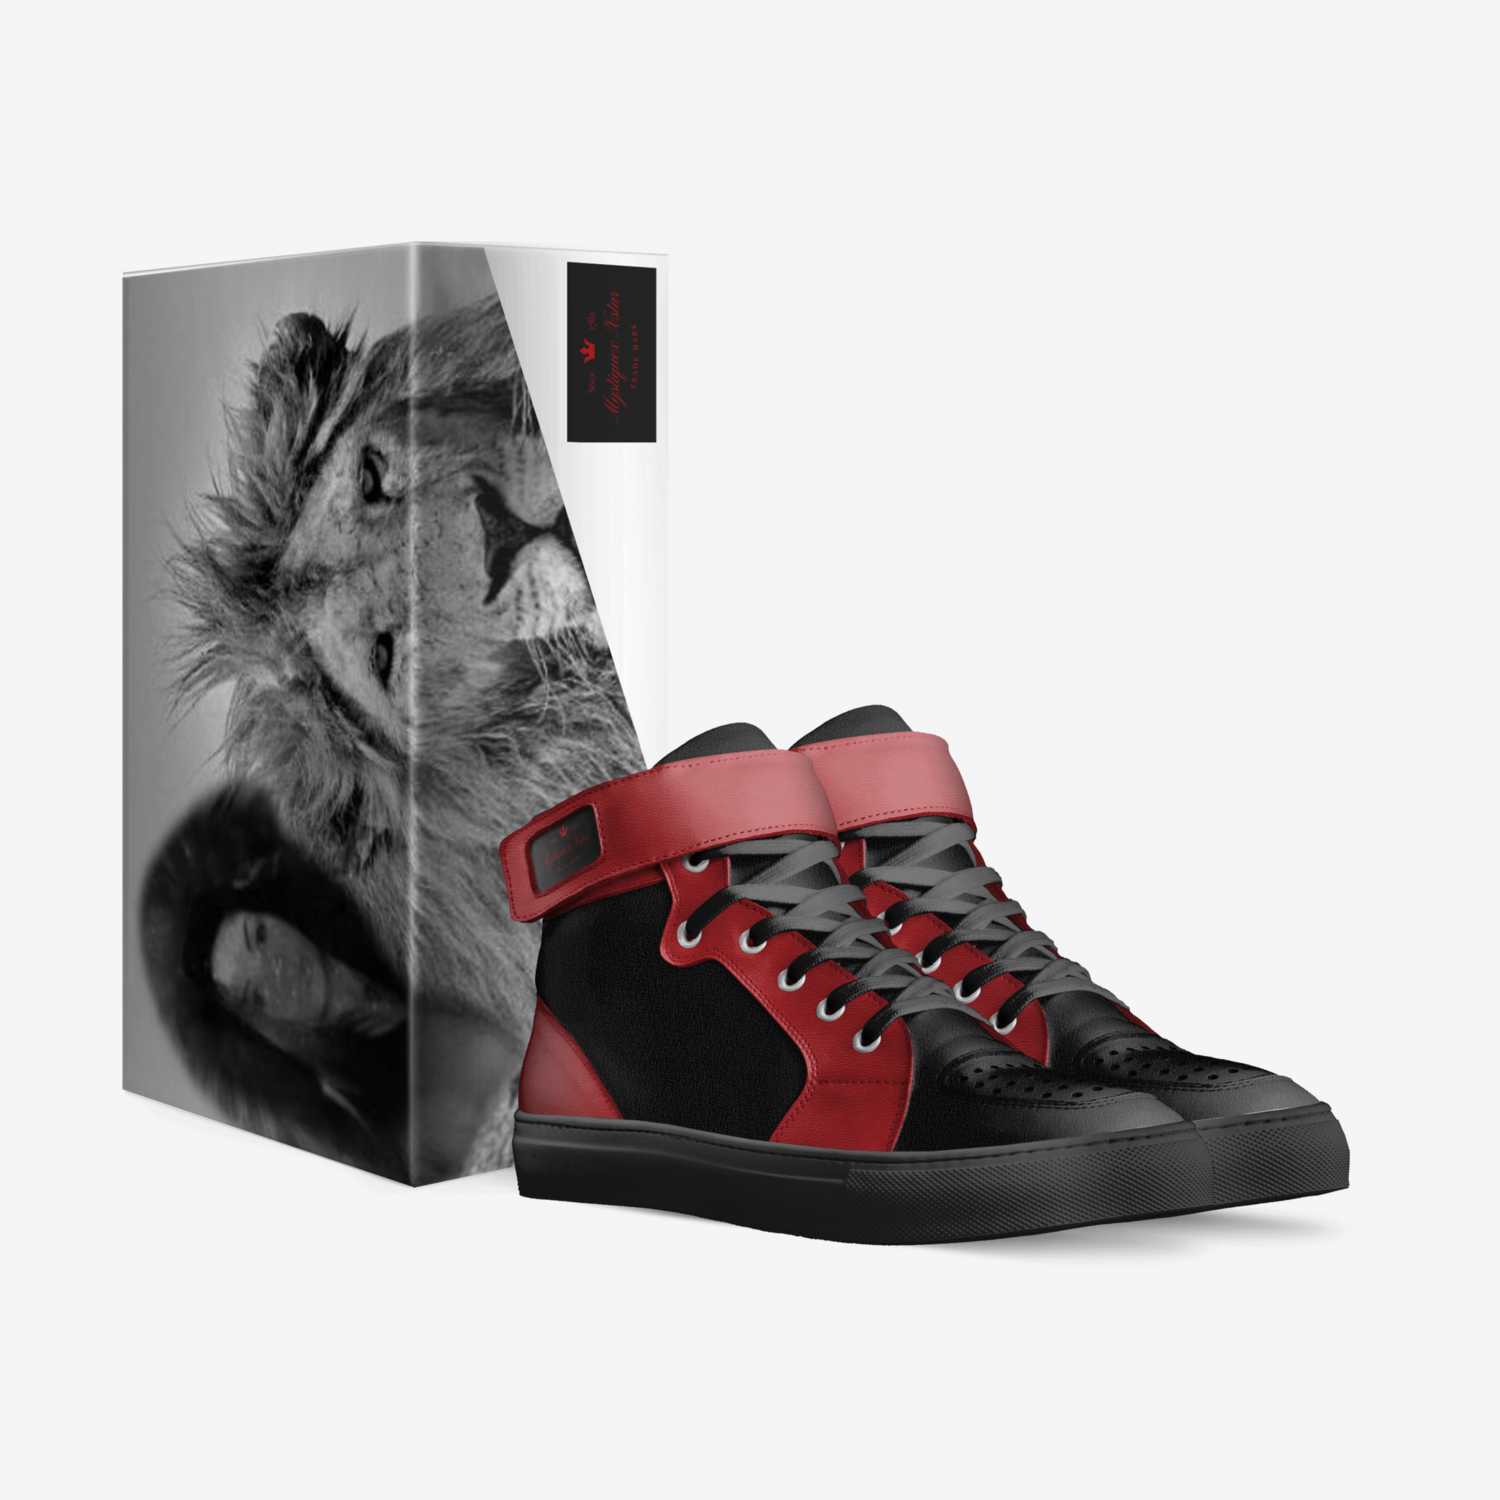 Mystiquex Xstar custom made in Italy shoes by Arely Ghigliotty | Box view